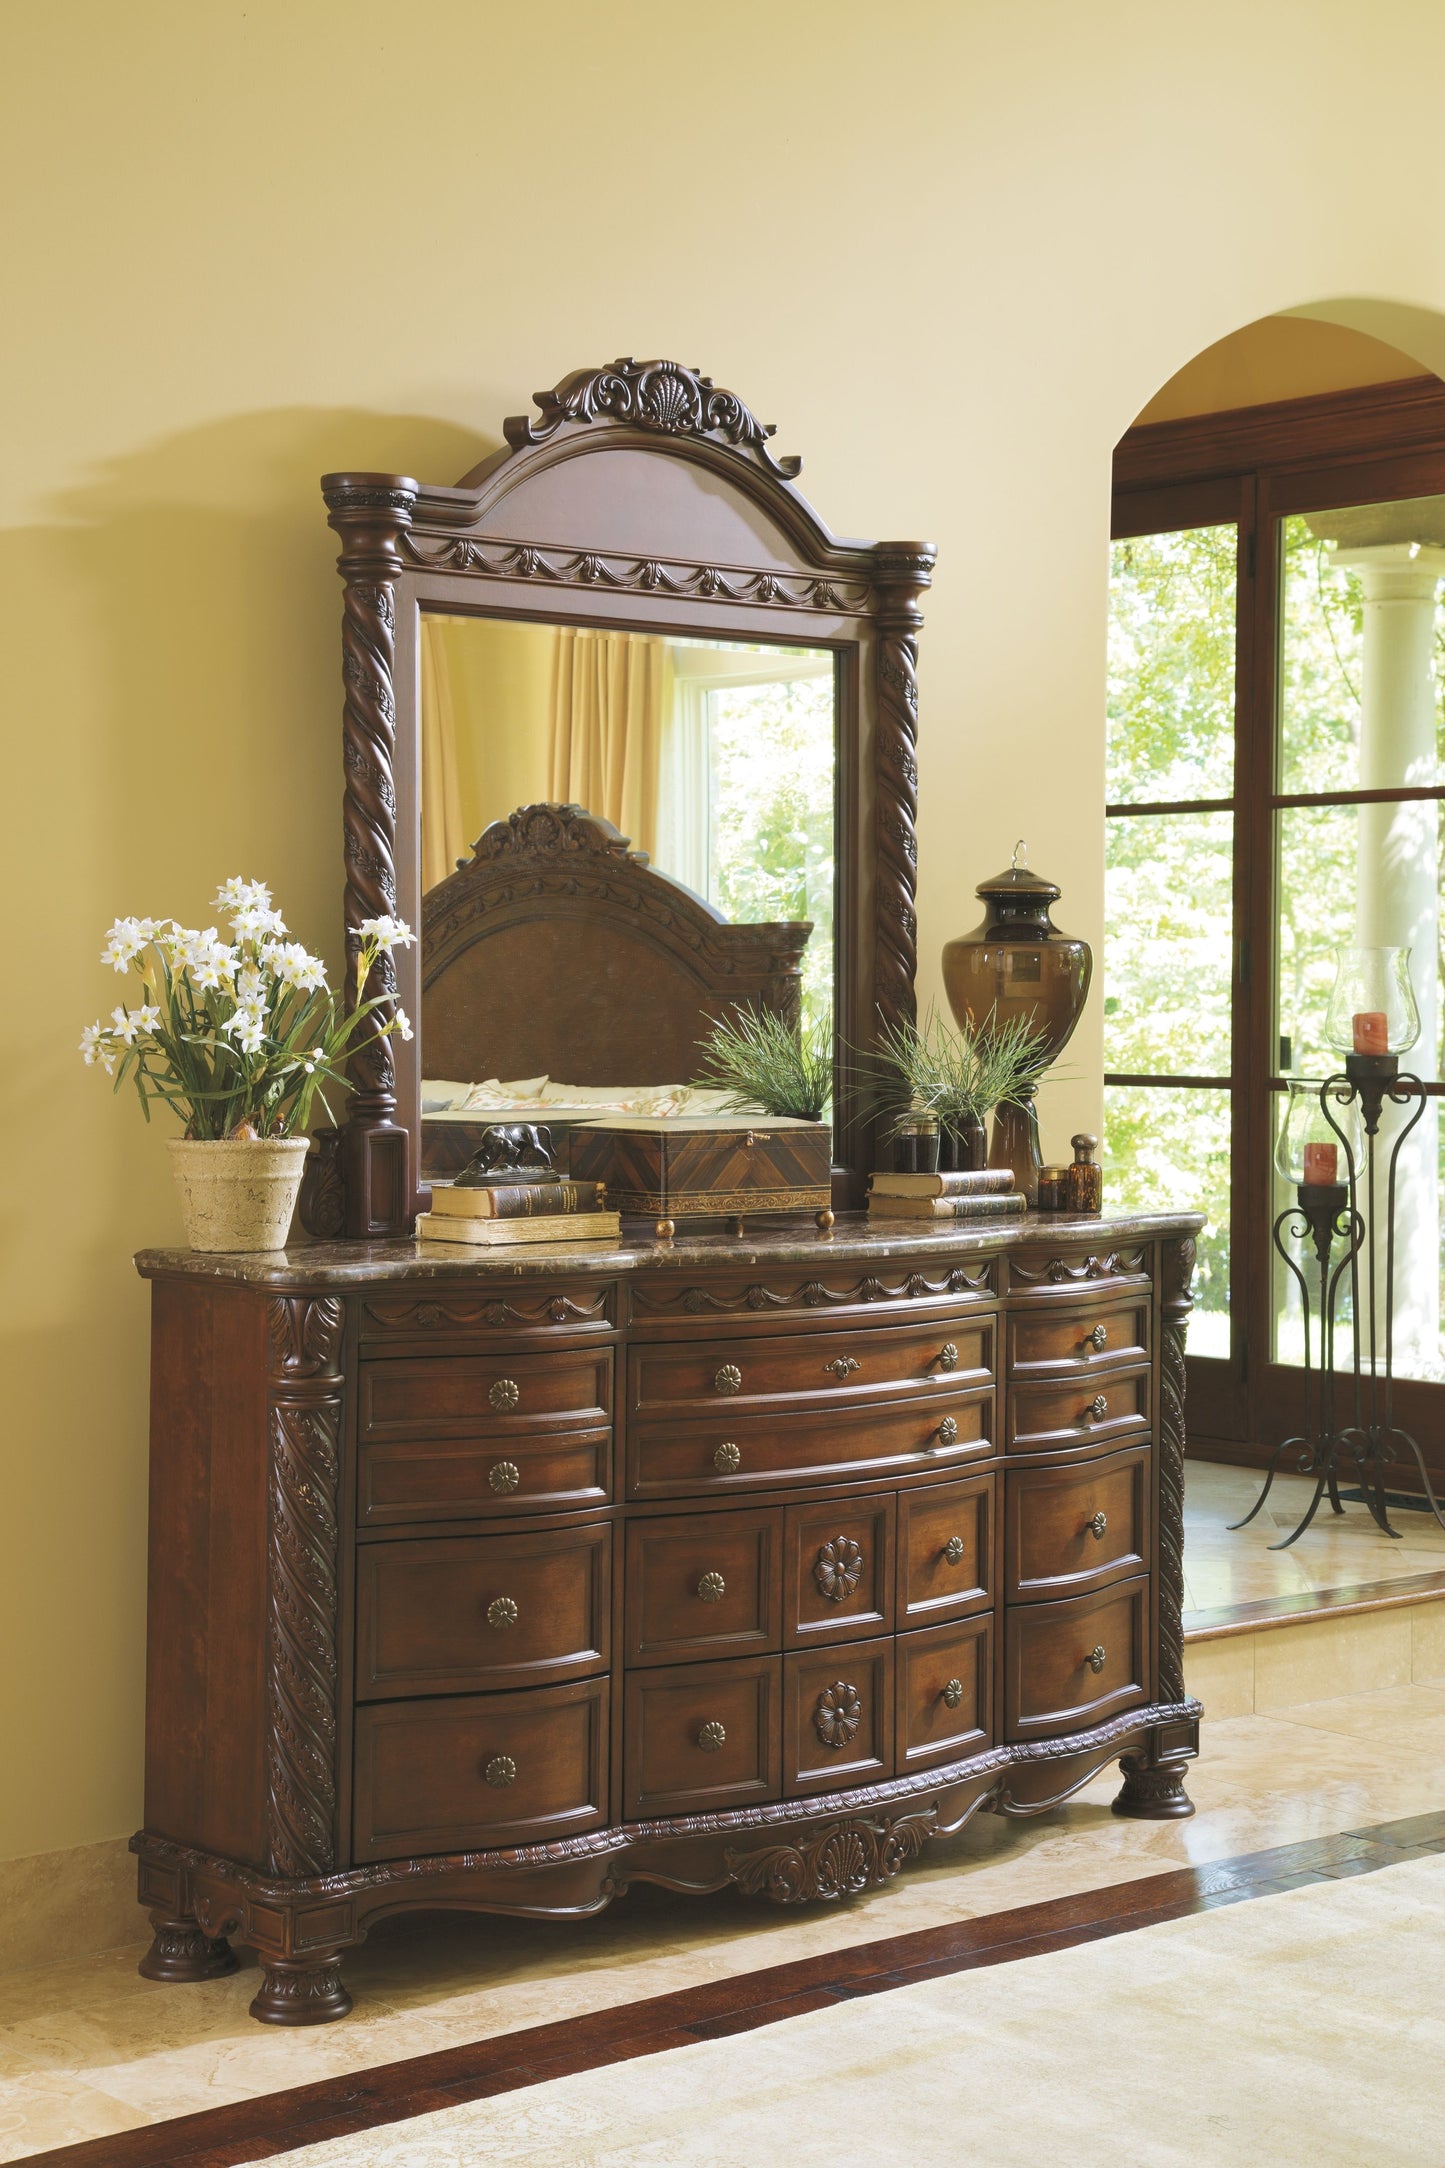 North Shore - Dark Brown - 10 Pc. - Dresser, Mirror, Chest, King Poster Bed With Canopy, 2 Nightstands